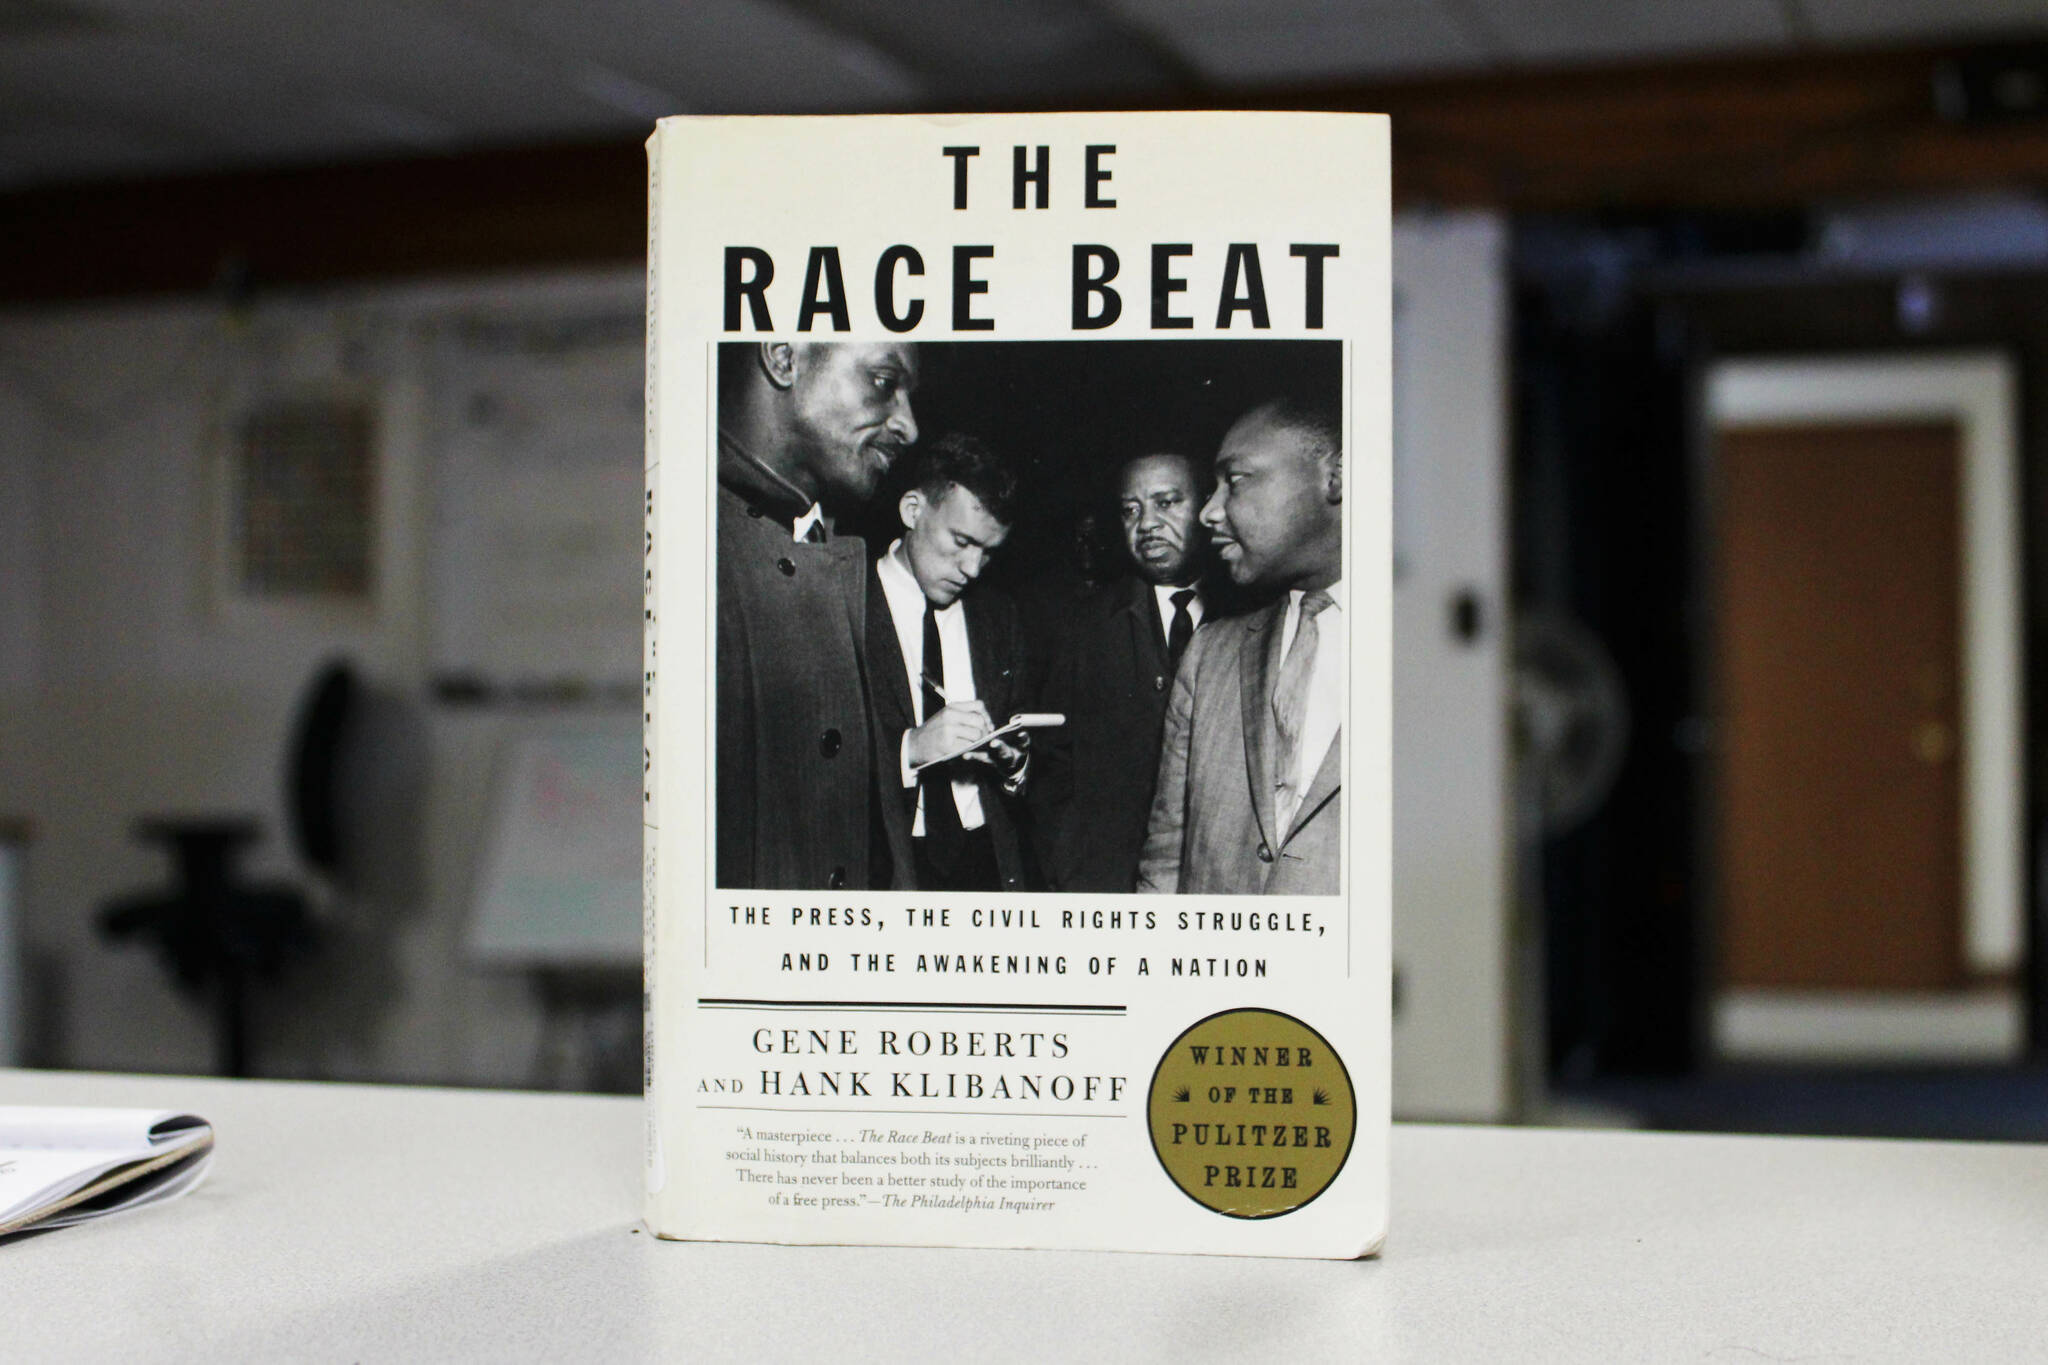 A copy of “The Race Beat: the Press, the Civil Rights Struggle, and the Awakening of a Nation” sits on a desk in the Peninsula Clarion office on Wednesday, Feb. 8, 2023, in Kenai, Alaska. (Ashlyn O’Hara/Peninsula Clarion)